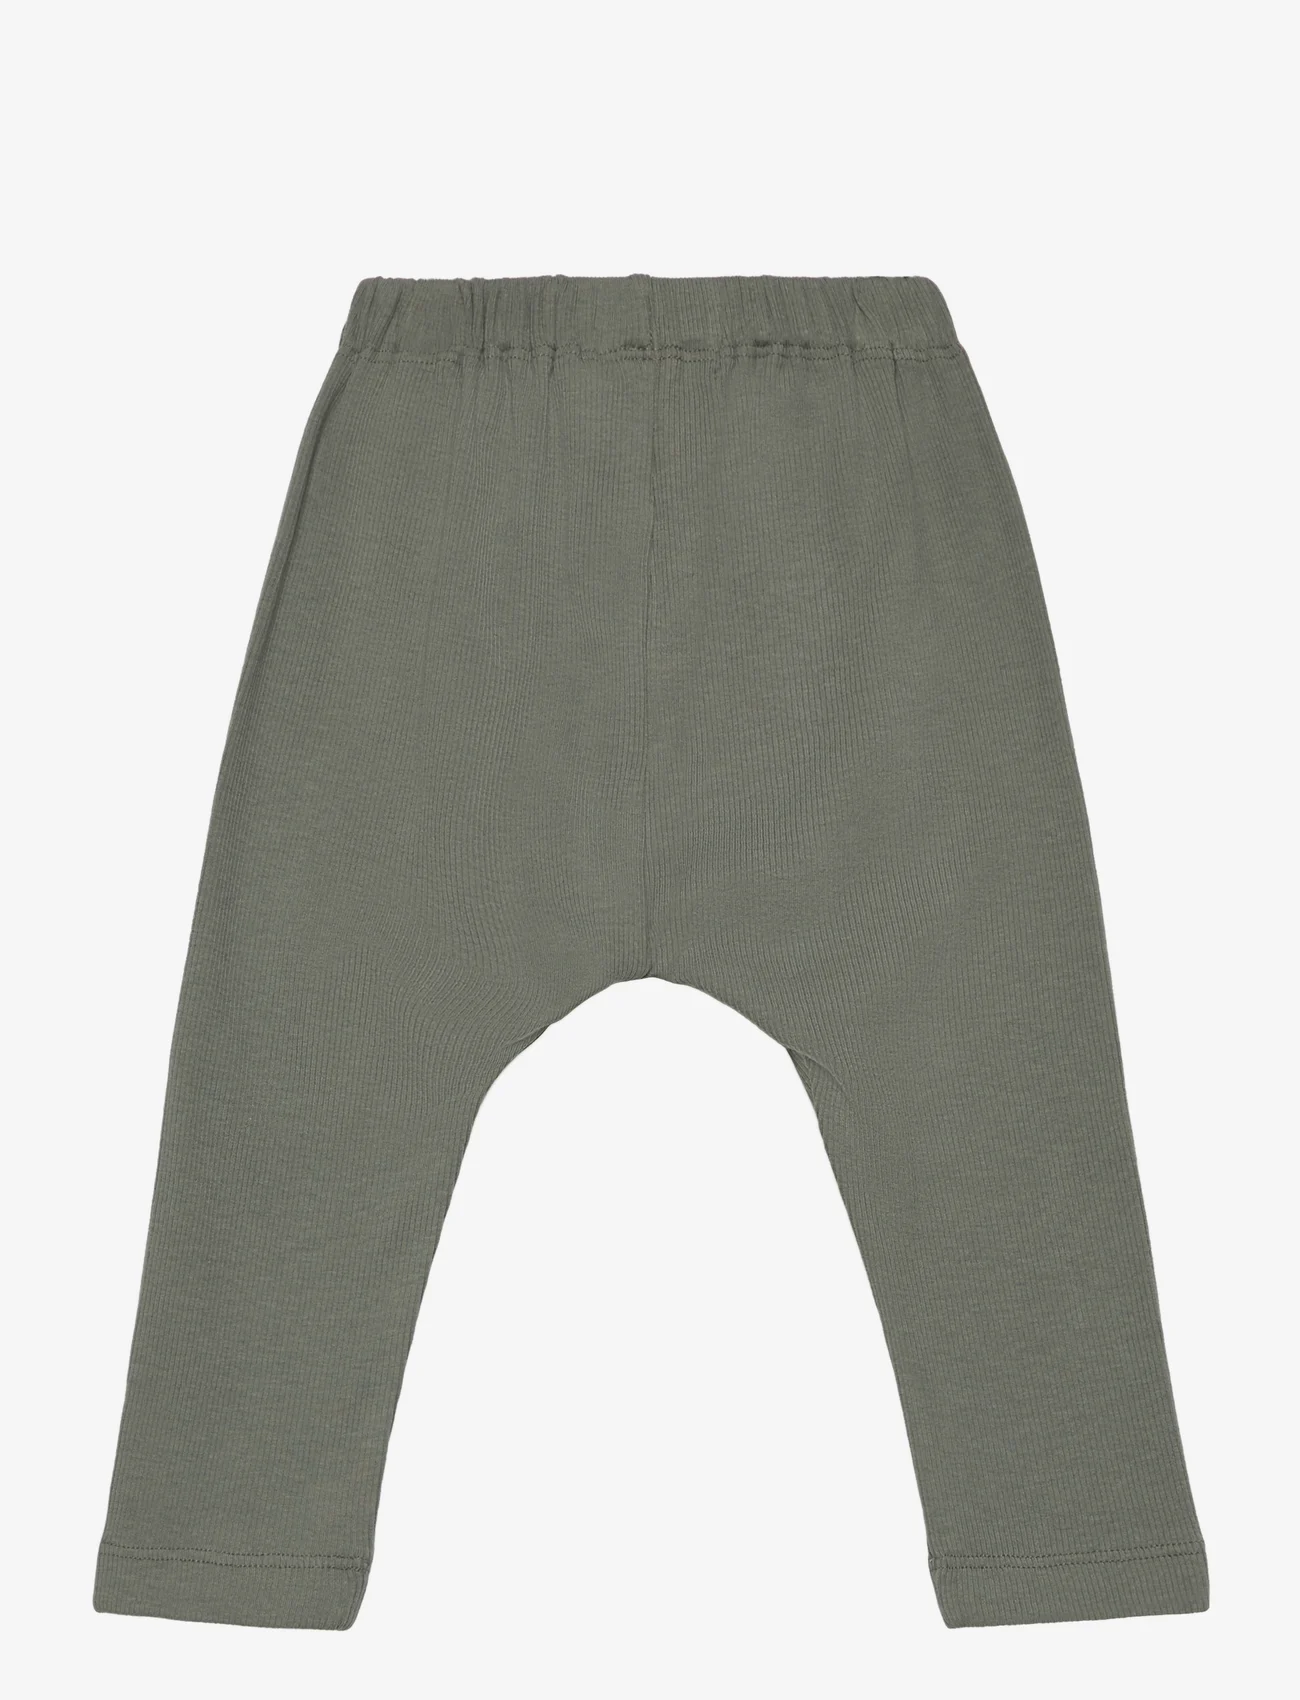 Lil'Atelier - NBMGAGO LOOSE PANT LIL NOOS - lowest prices - agave green - 1